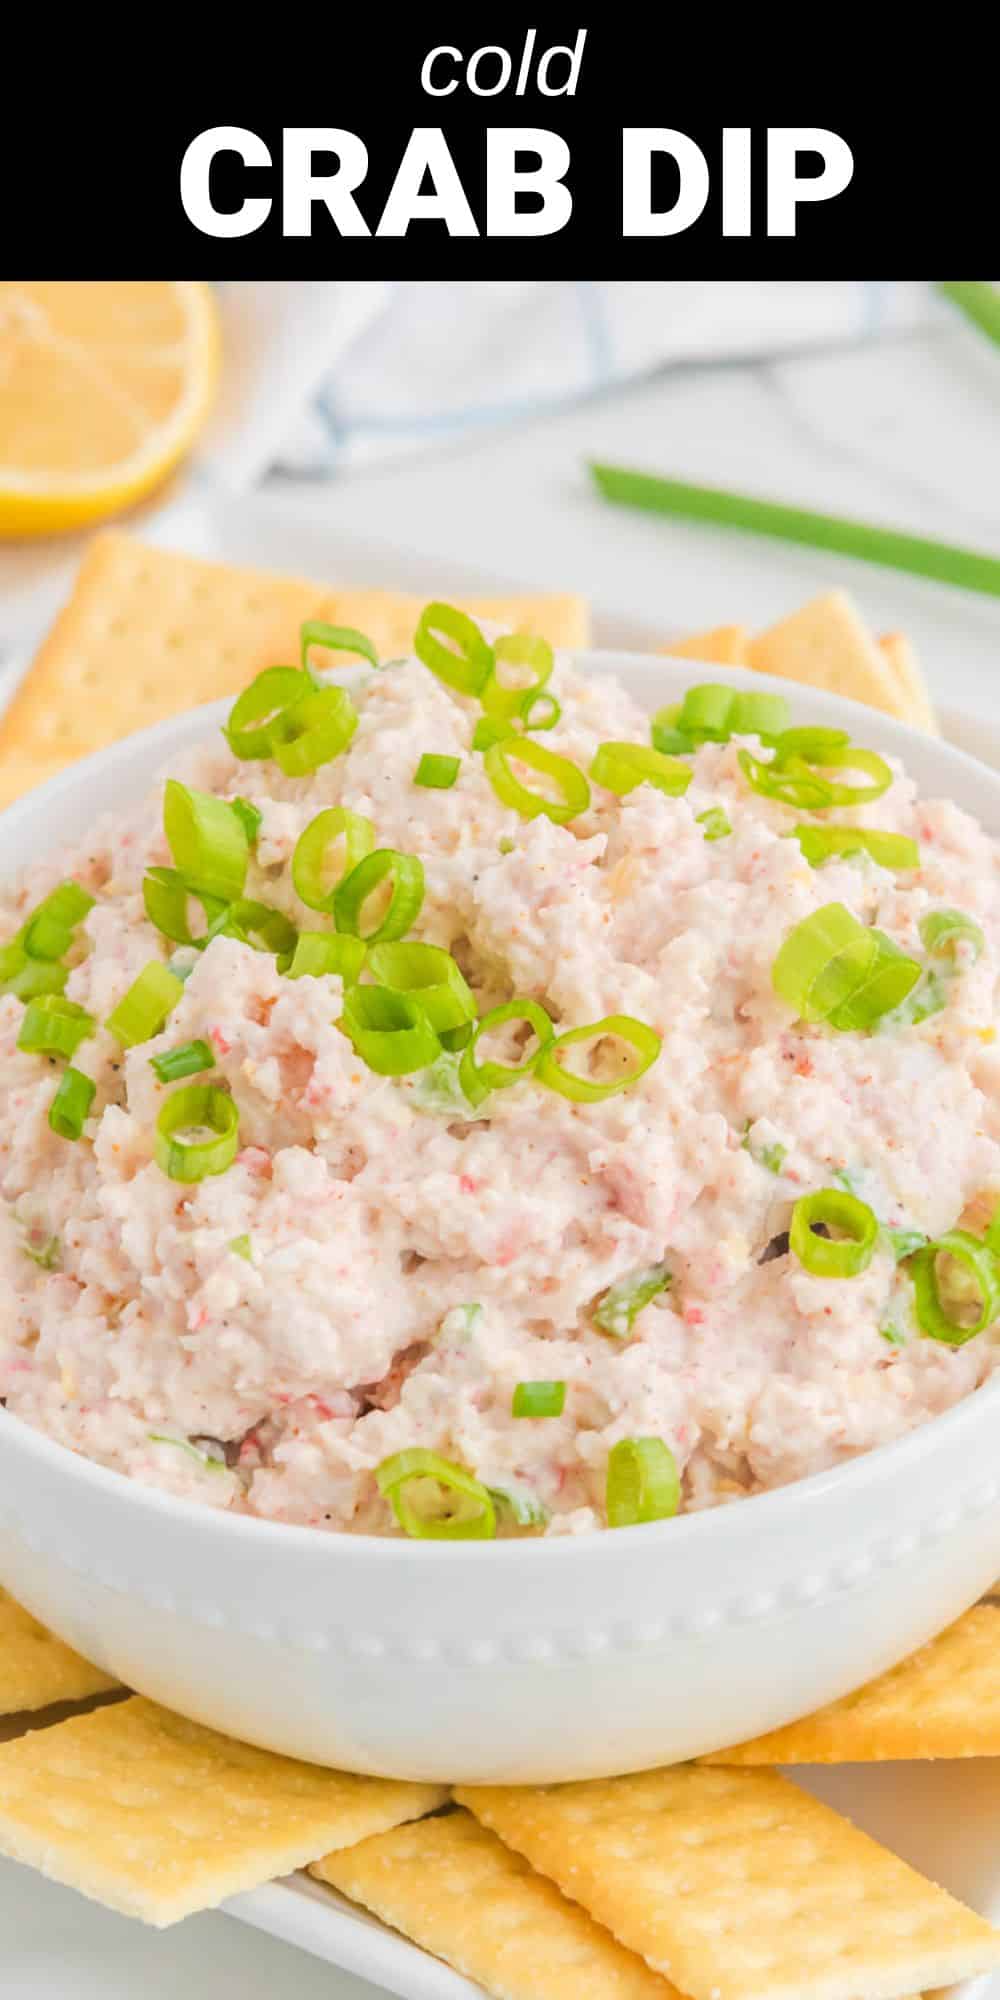 This quick and easy Cold Crab Dip is so good that it disappears faster than it takes to prepare it! Served chilled, this dip is the perfect party appetizer for summer parties, but it has a touch of elegance that also makes it great for holiday parties.